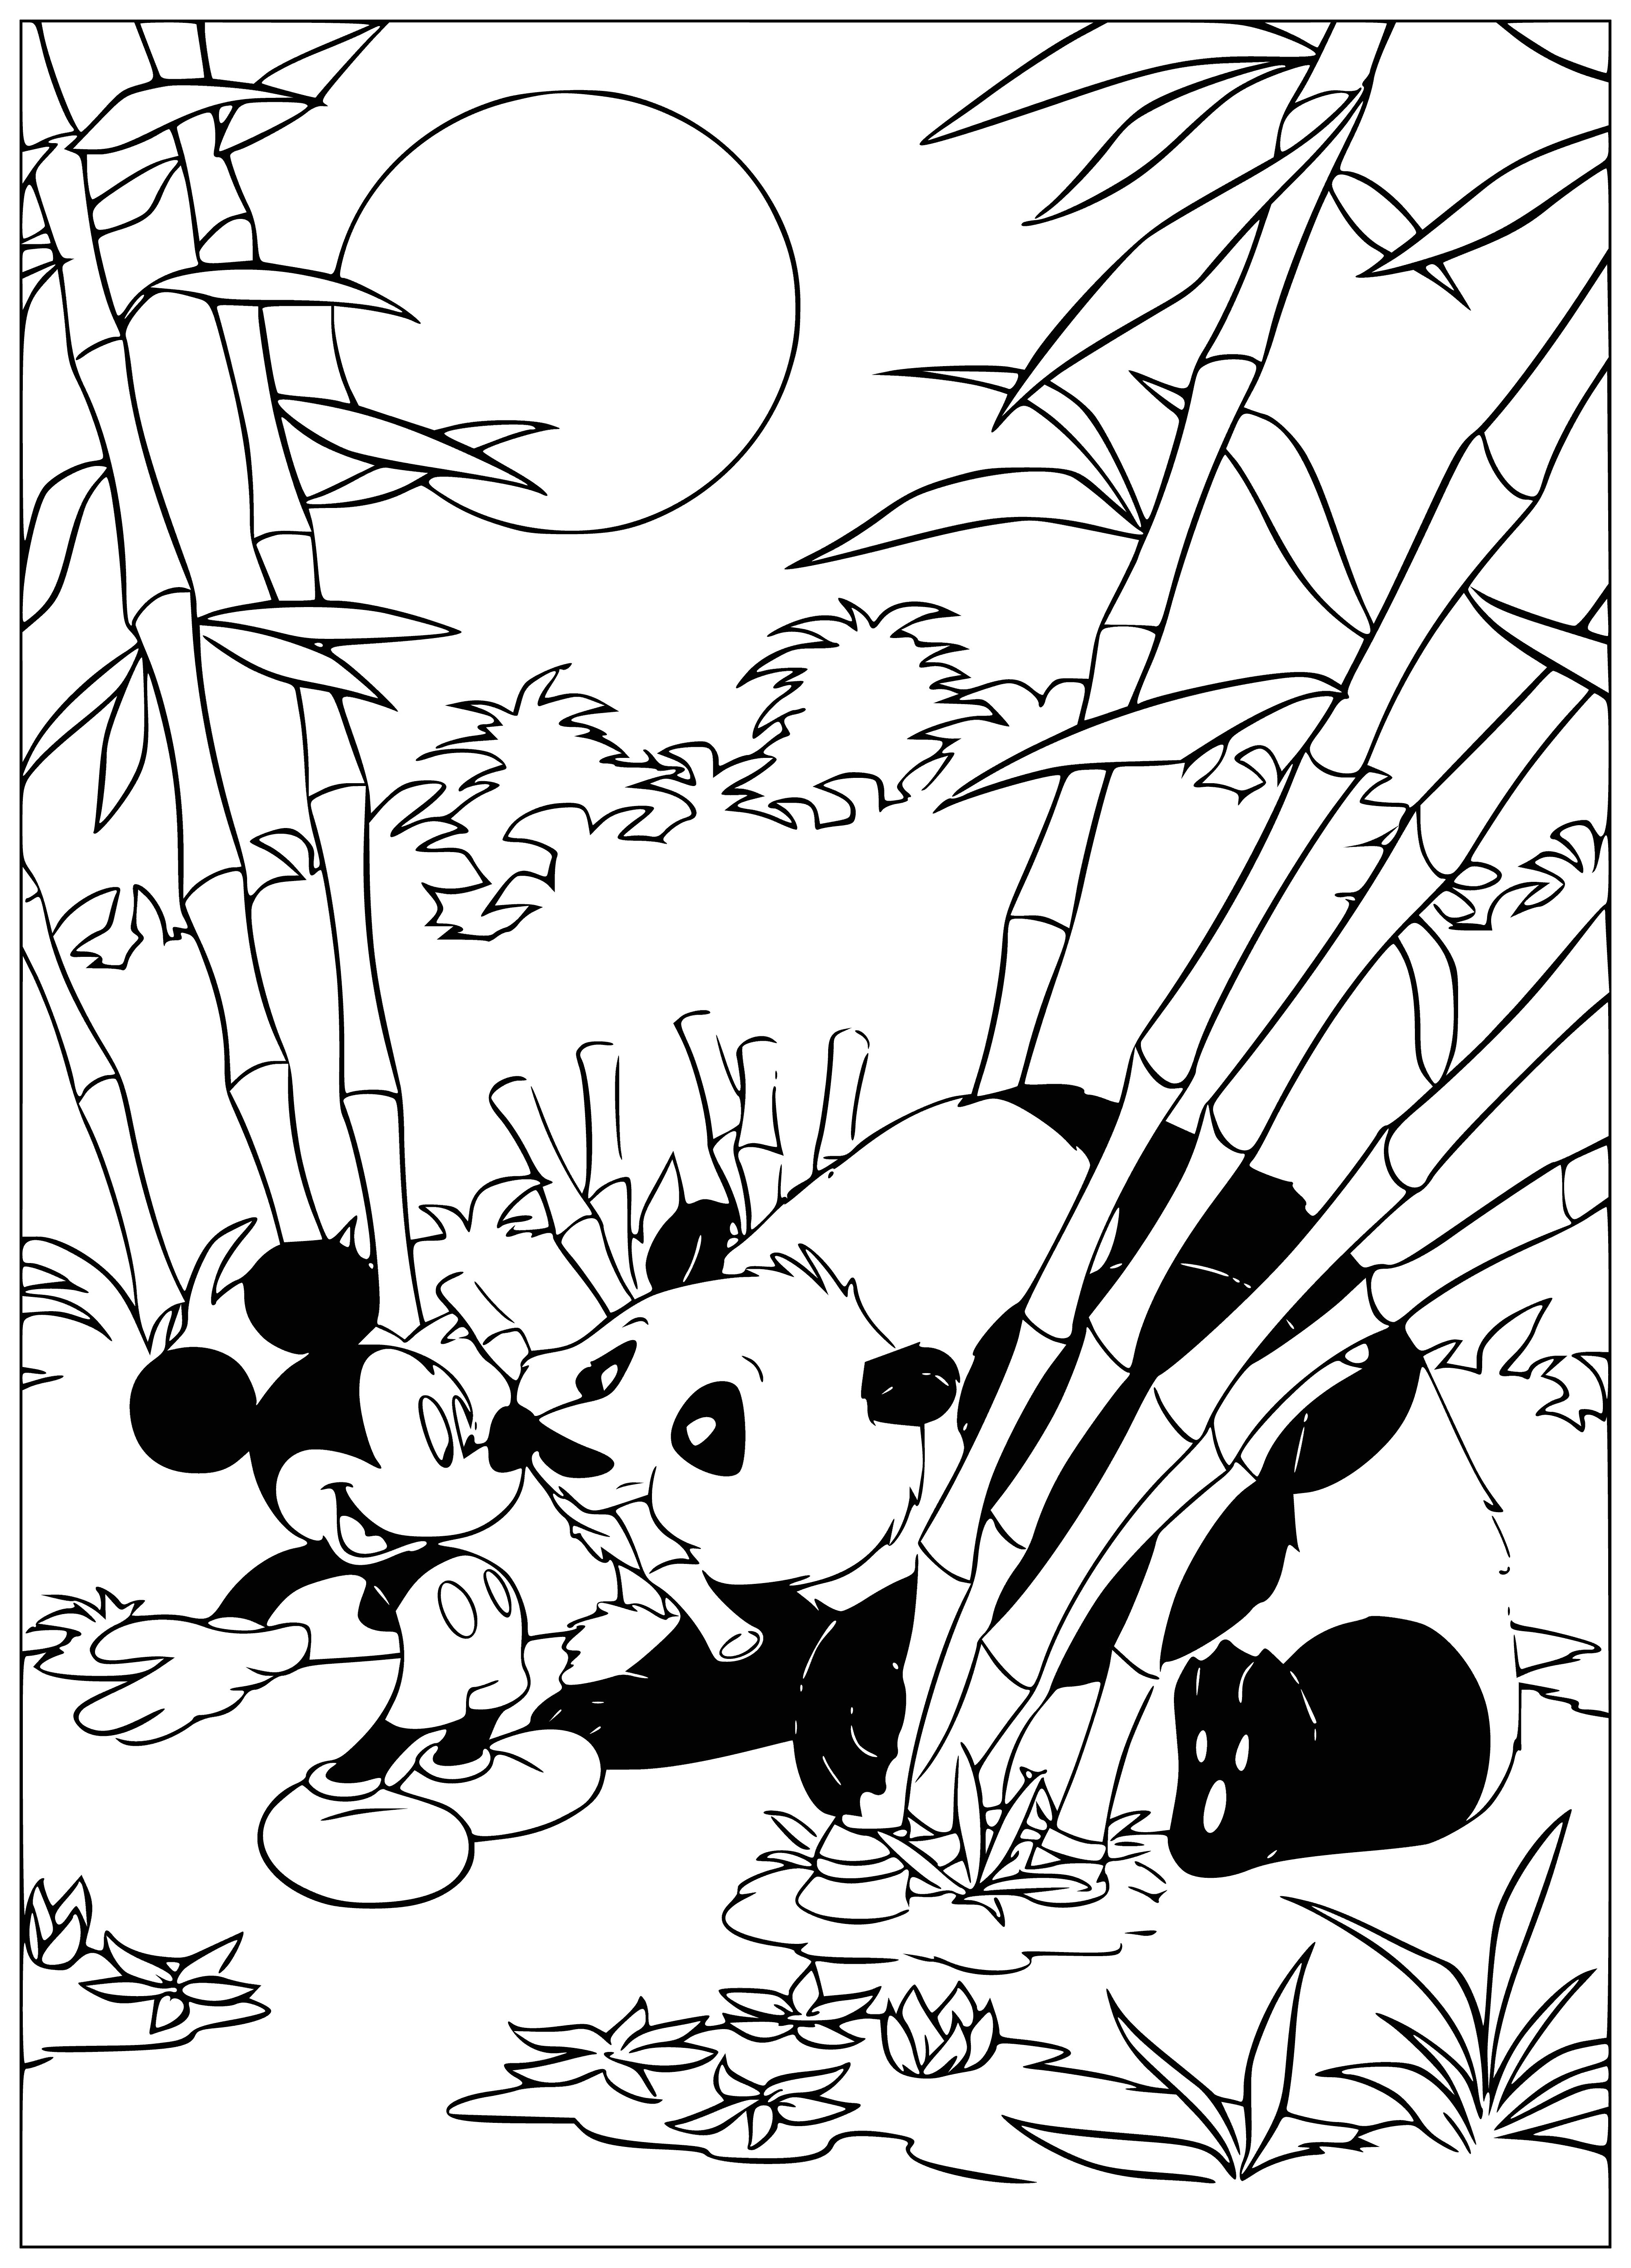 coloring page: A panda sits in the center of a page, wearing a red shirt & shoes, with a green tree & blue sky behind him. #pandas #nature #Sky